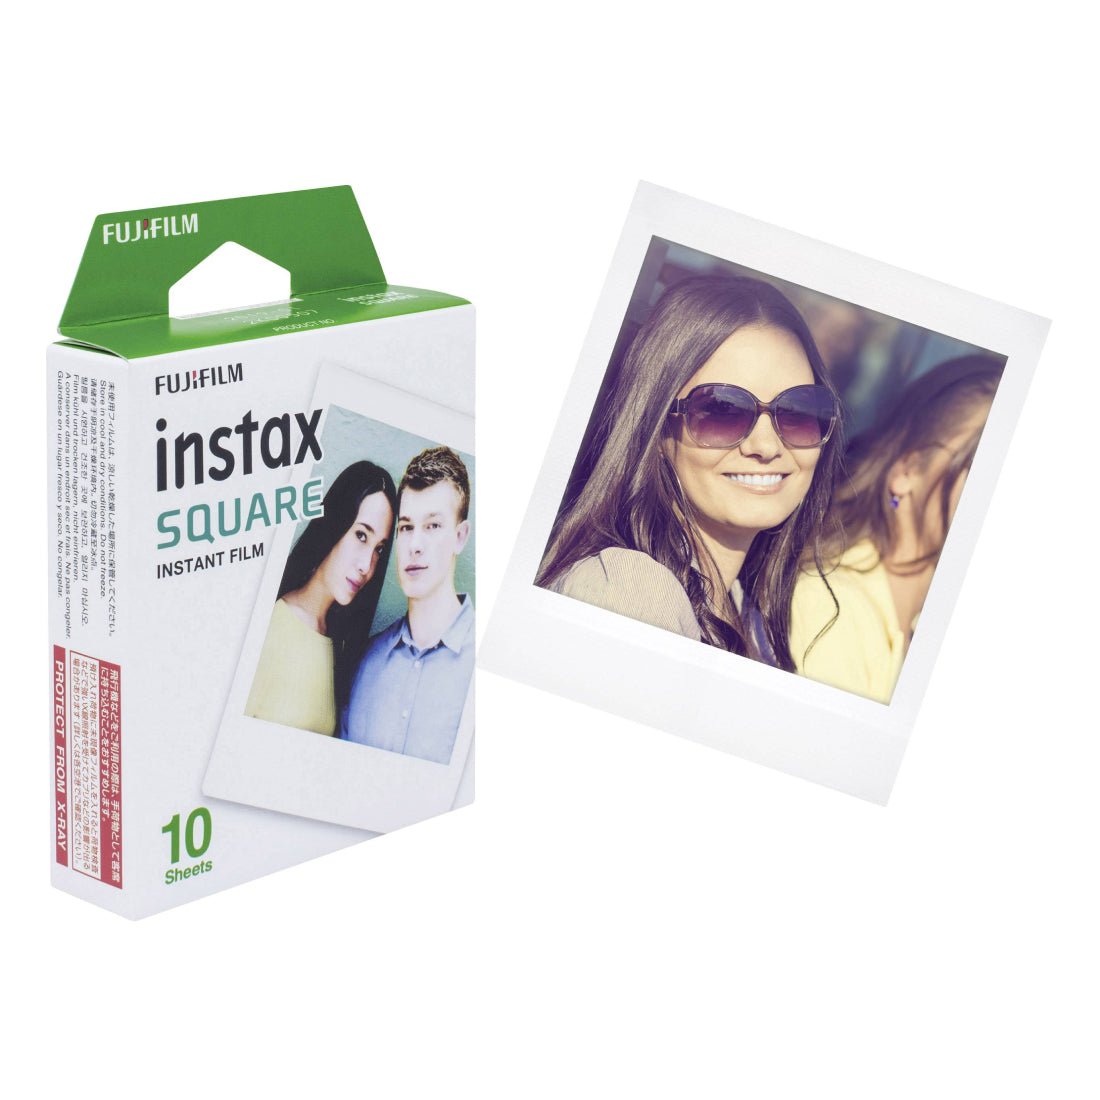 Fujifilm Instax Square Instant Film - 10 Sheets - أوراق طباعة - Store 974 | ستور ٩٧٤